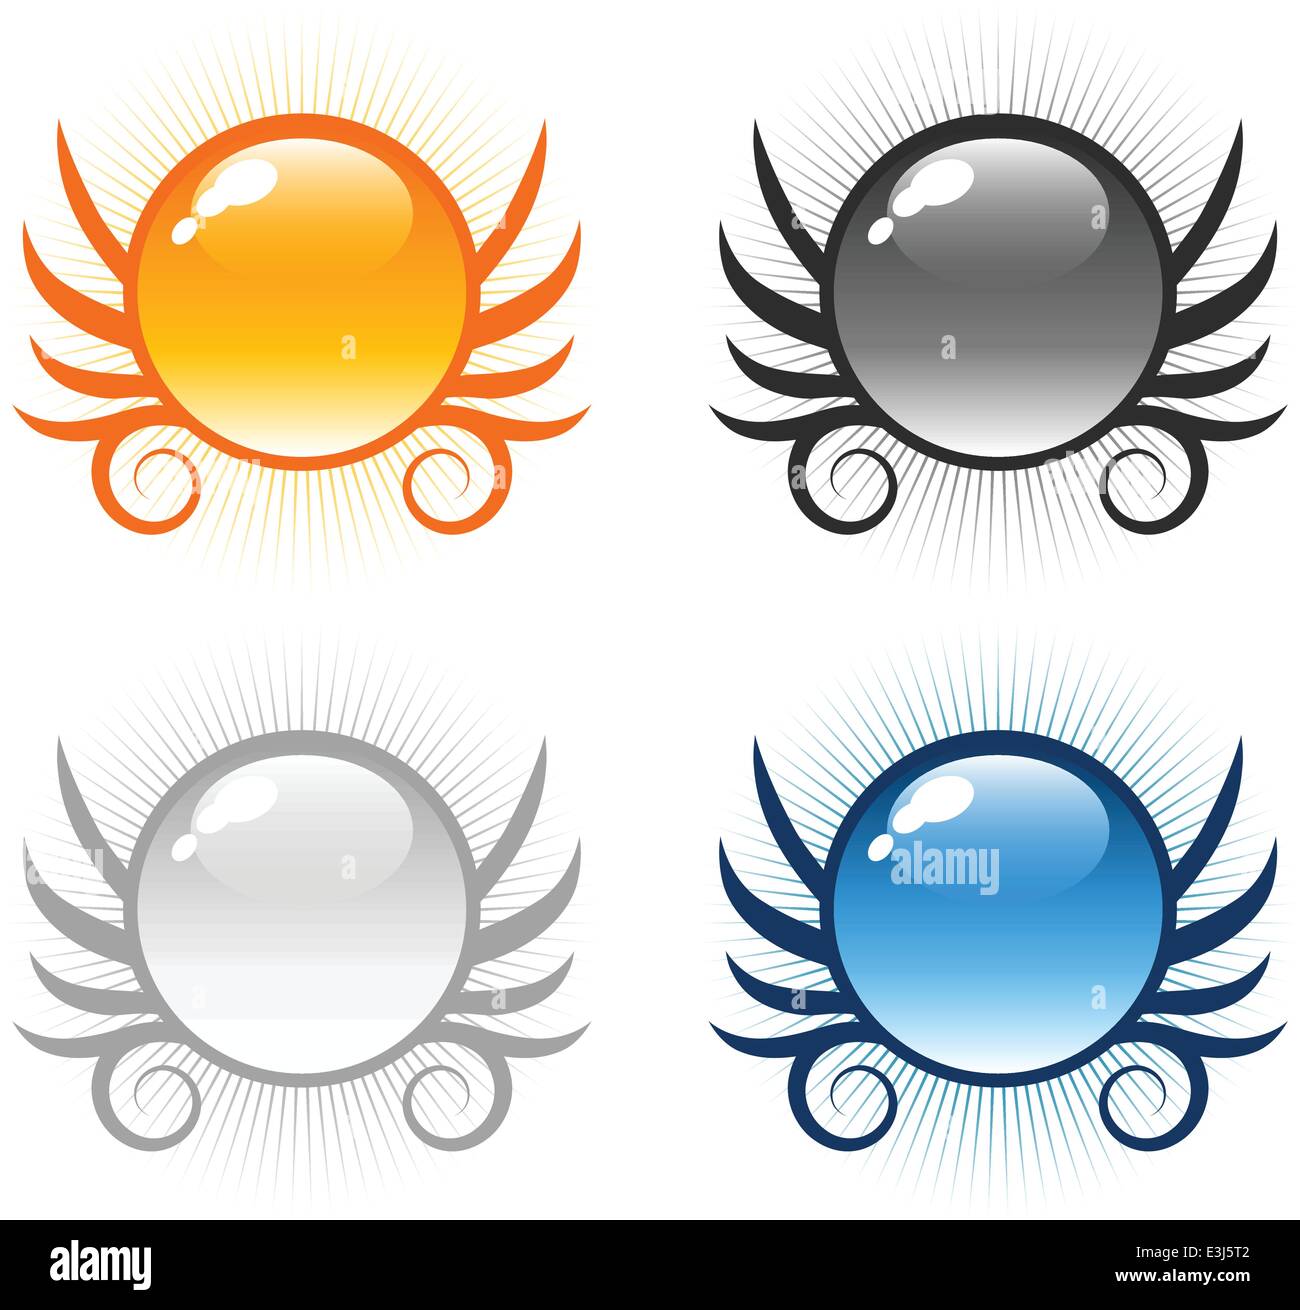 Set of glossy round winged sphere button icons Stock Vector